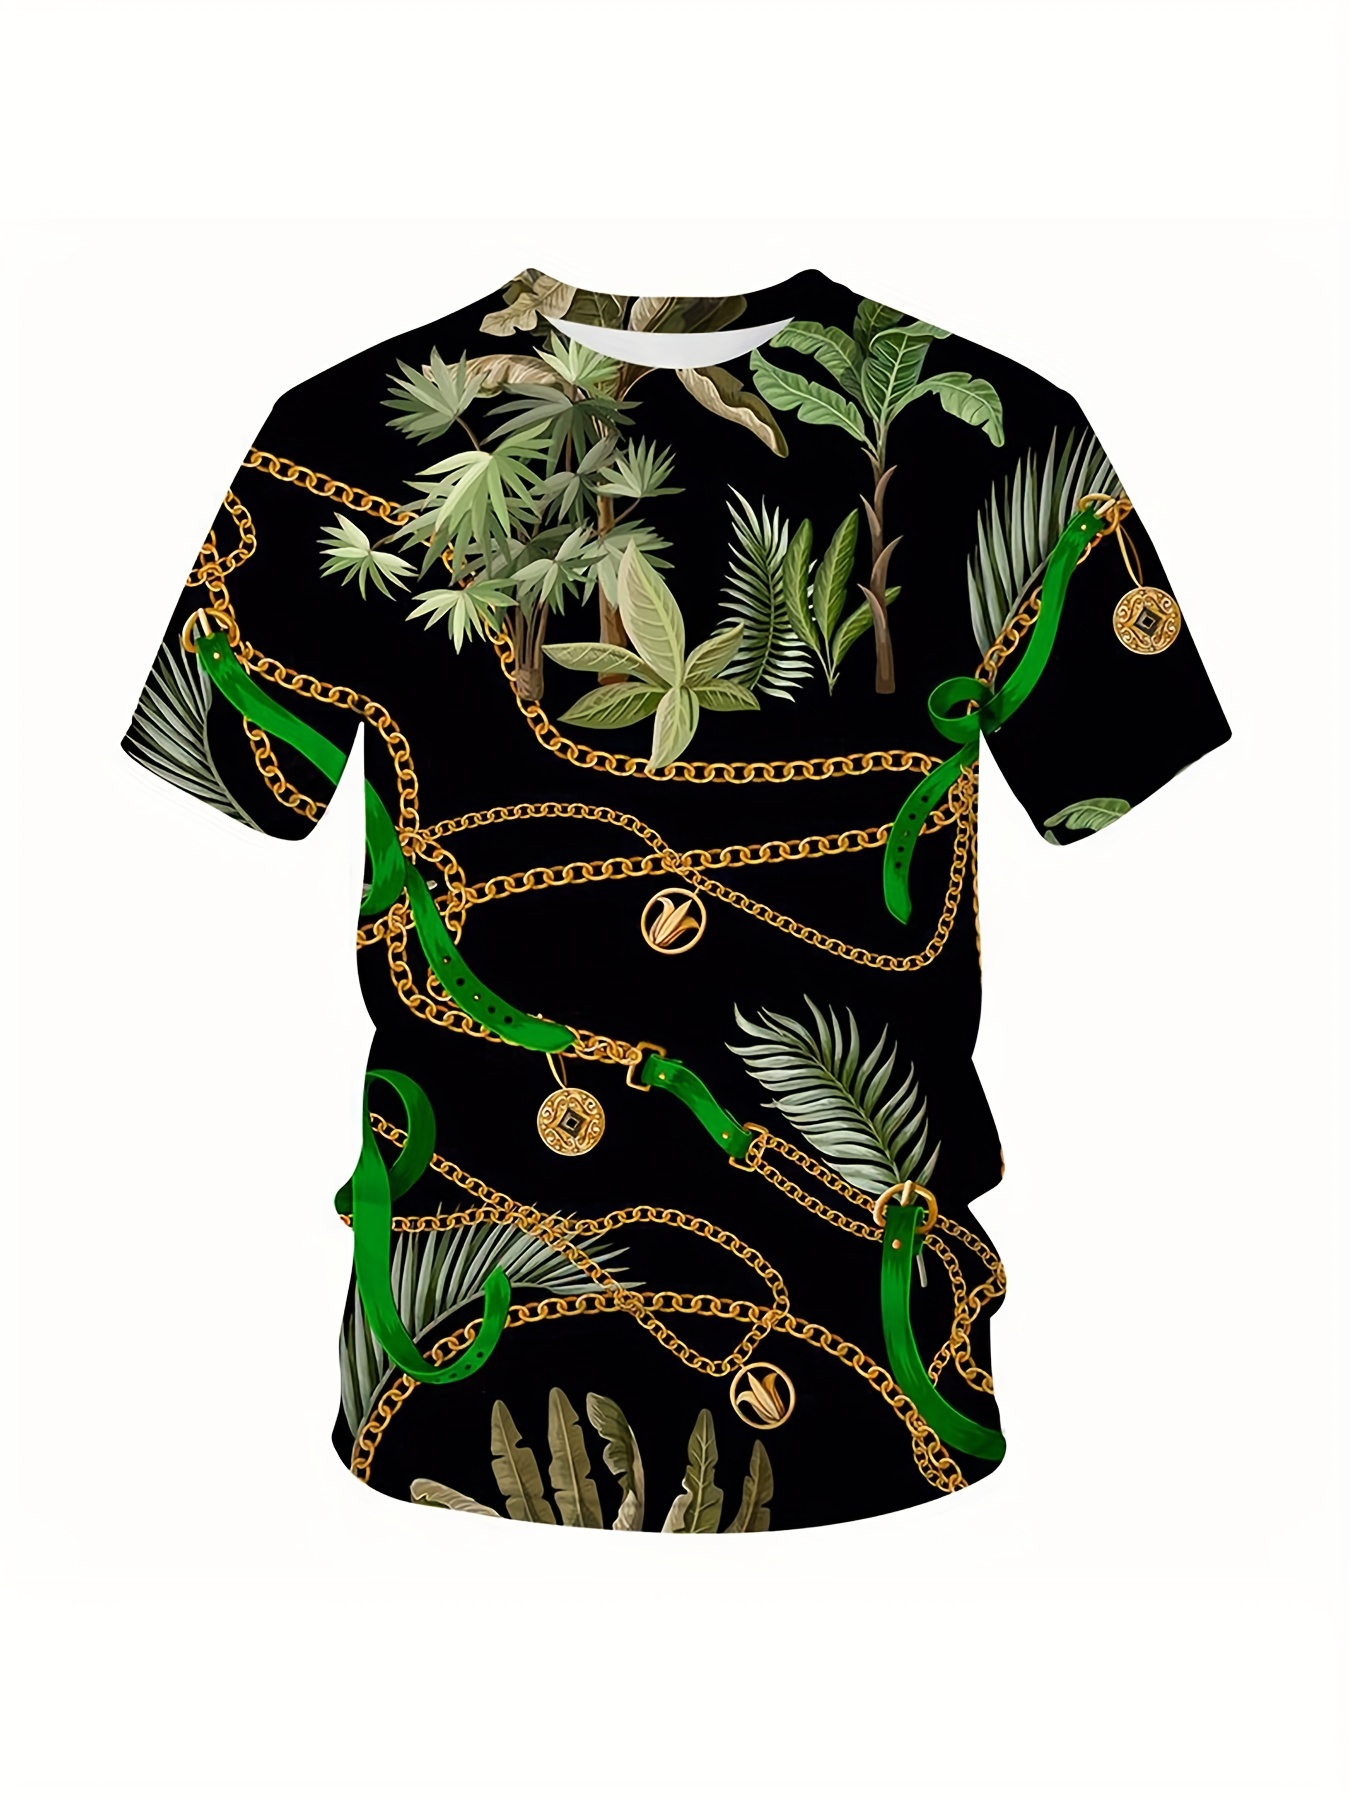 Leaf Golden Chain Pattern Print Men's T-Shirt Sale at Our Store